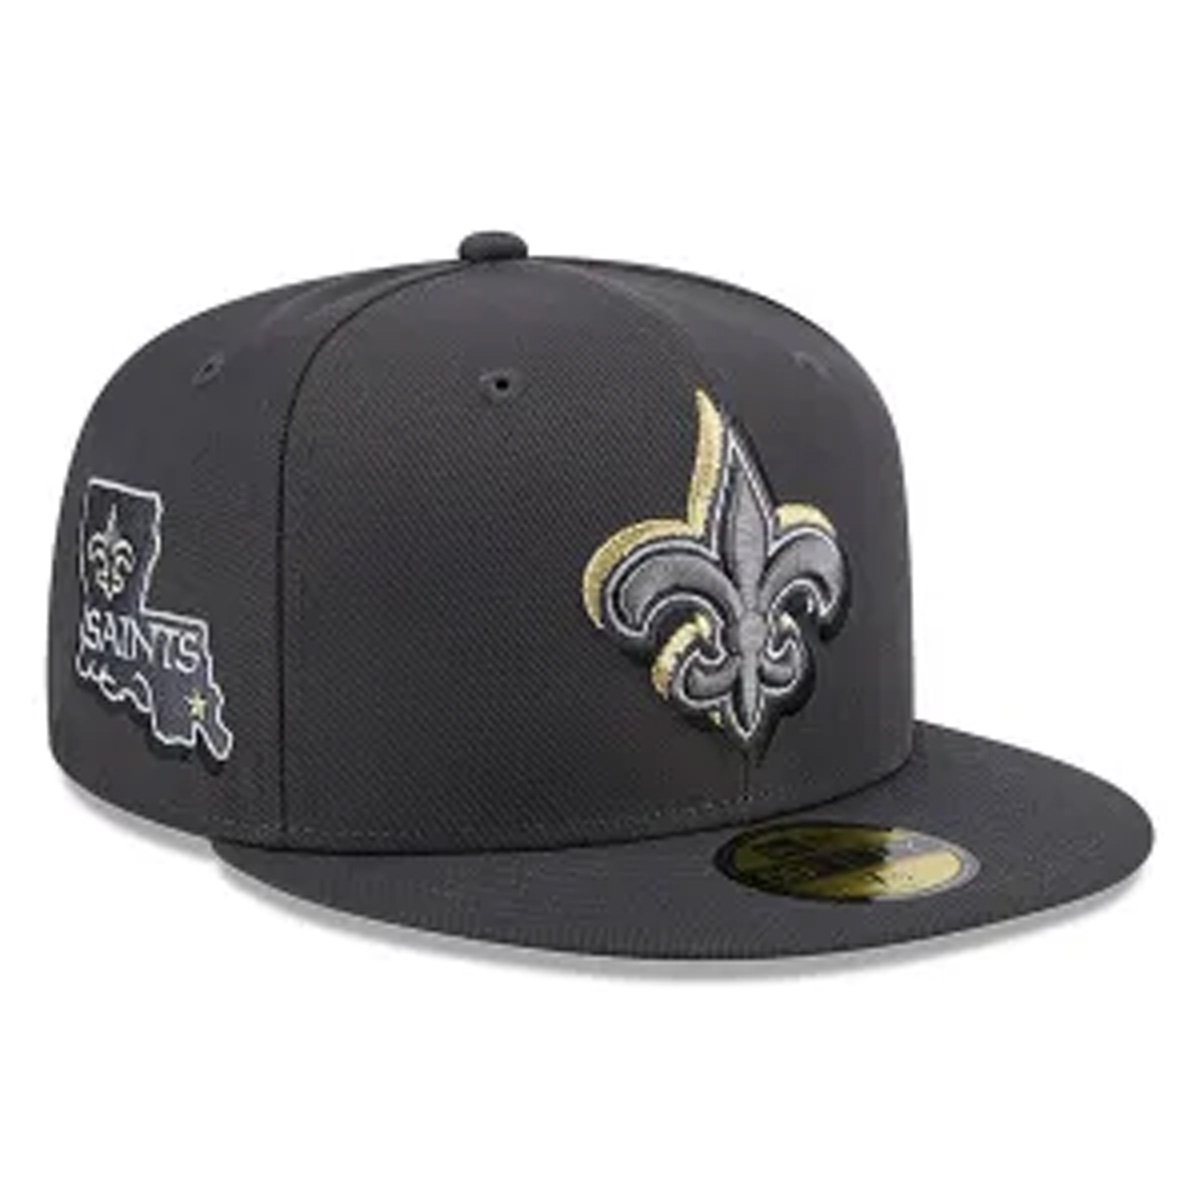 Check out the new New Orleans Saints 2024 NFL Draft hat